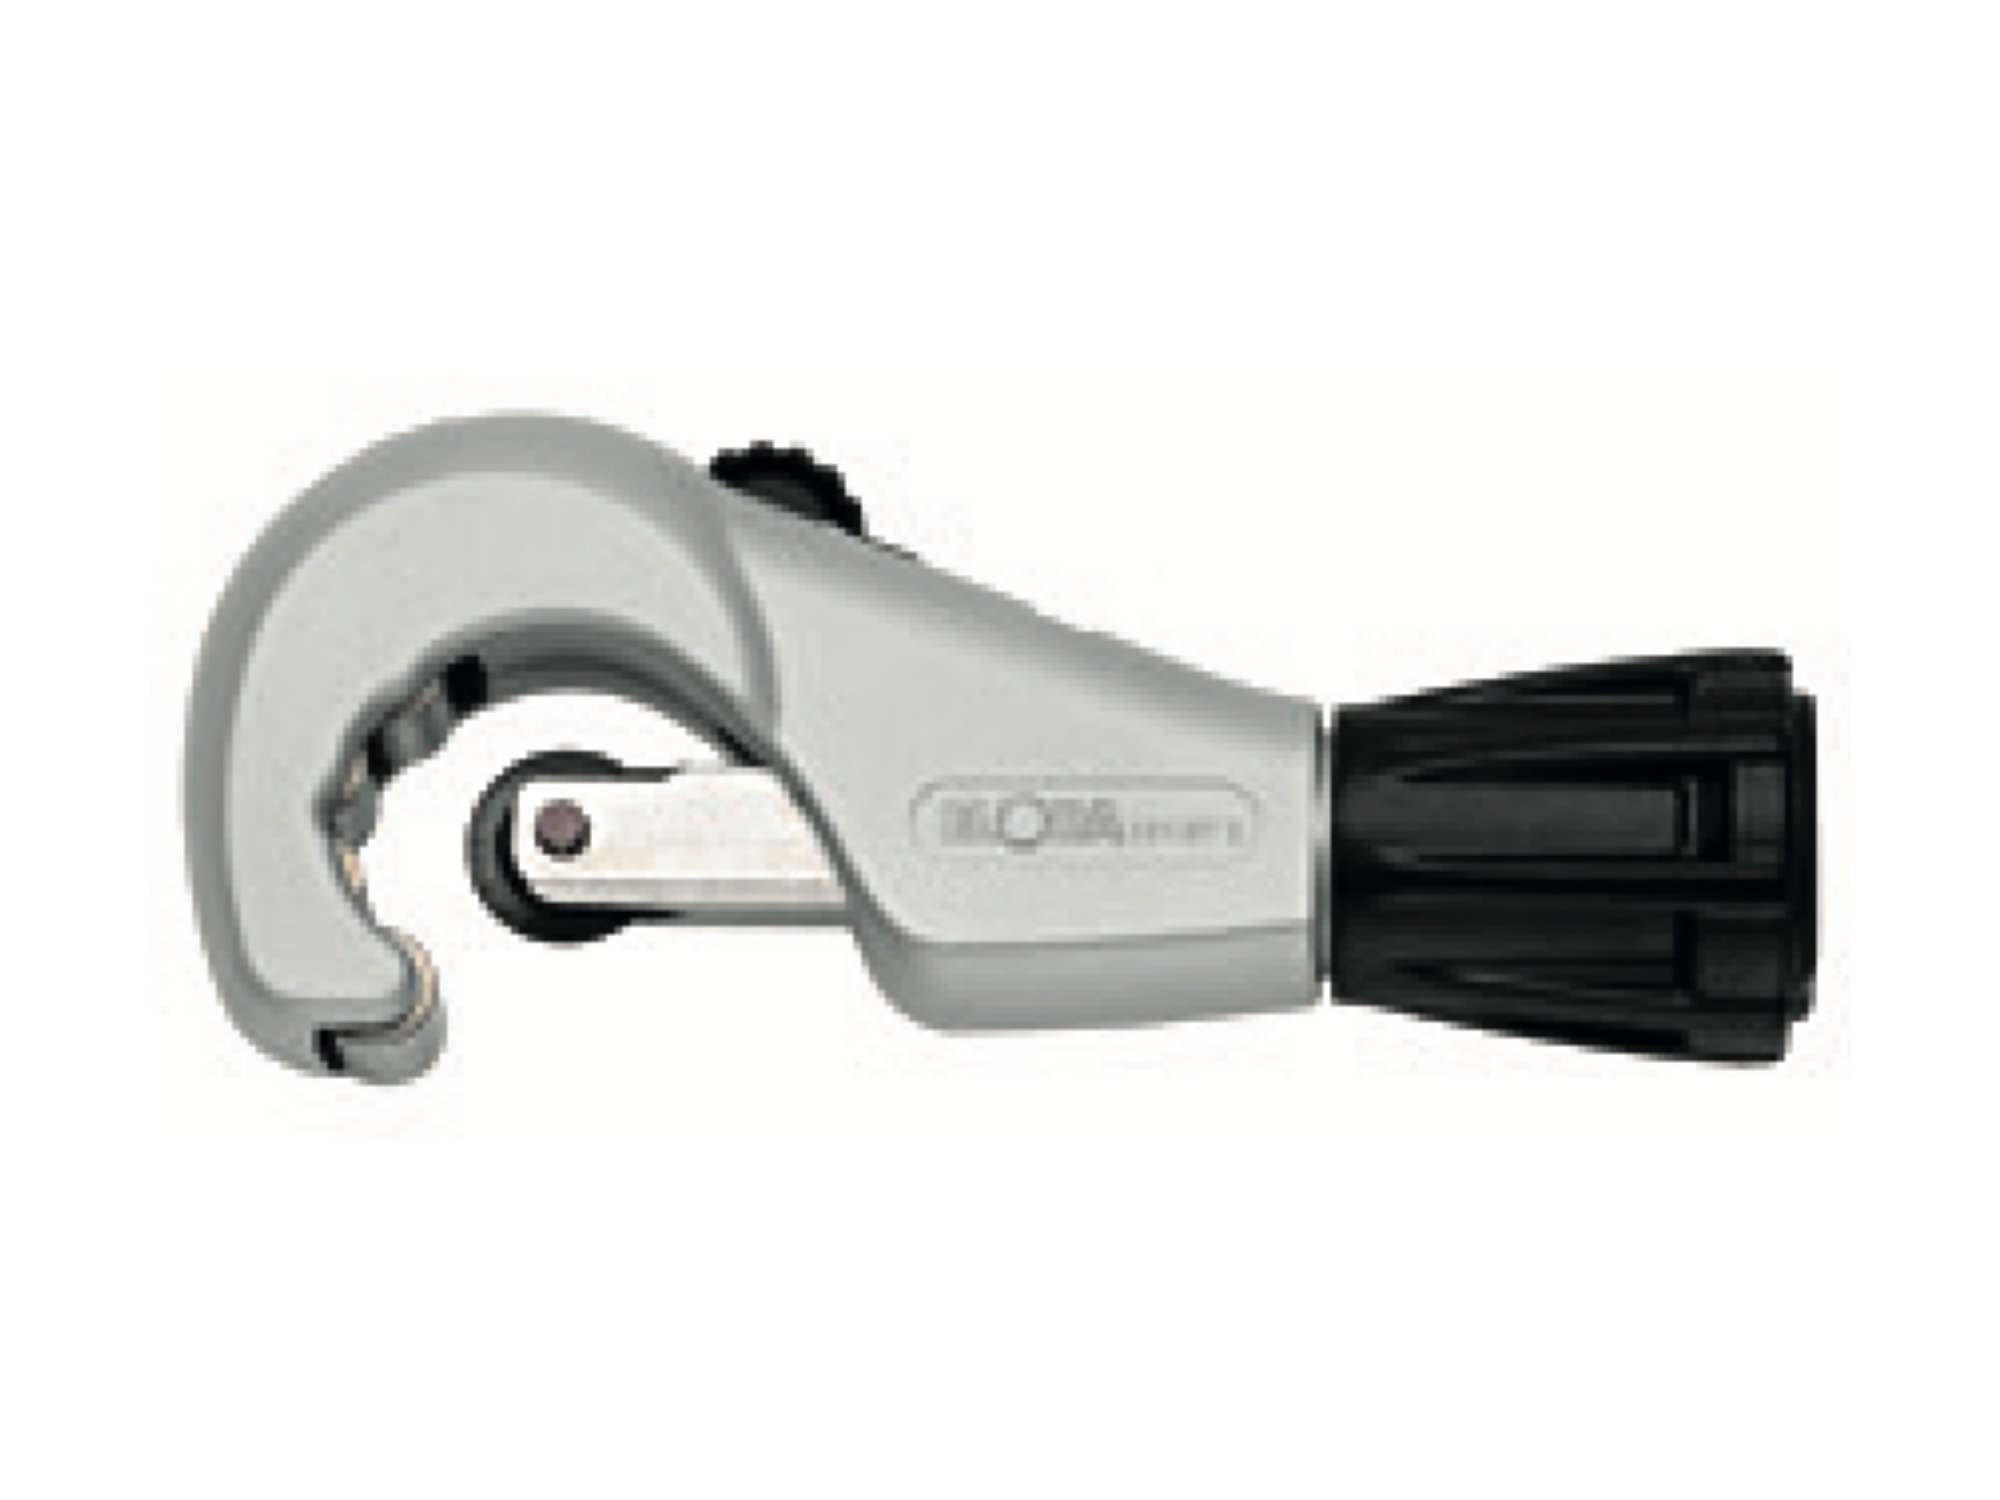 ELORA 181-ST1 Pipe Cutter For Thin-Walled Metal Tube 3-30 mm - Premium Pipe Cutter from ELORA - Shop now at Yew Aik.